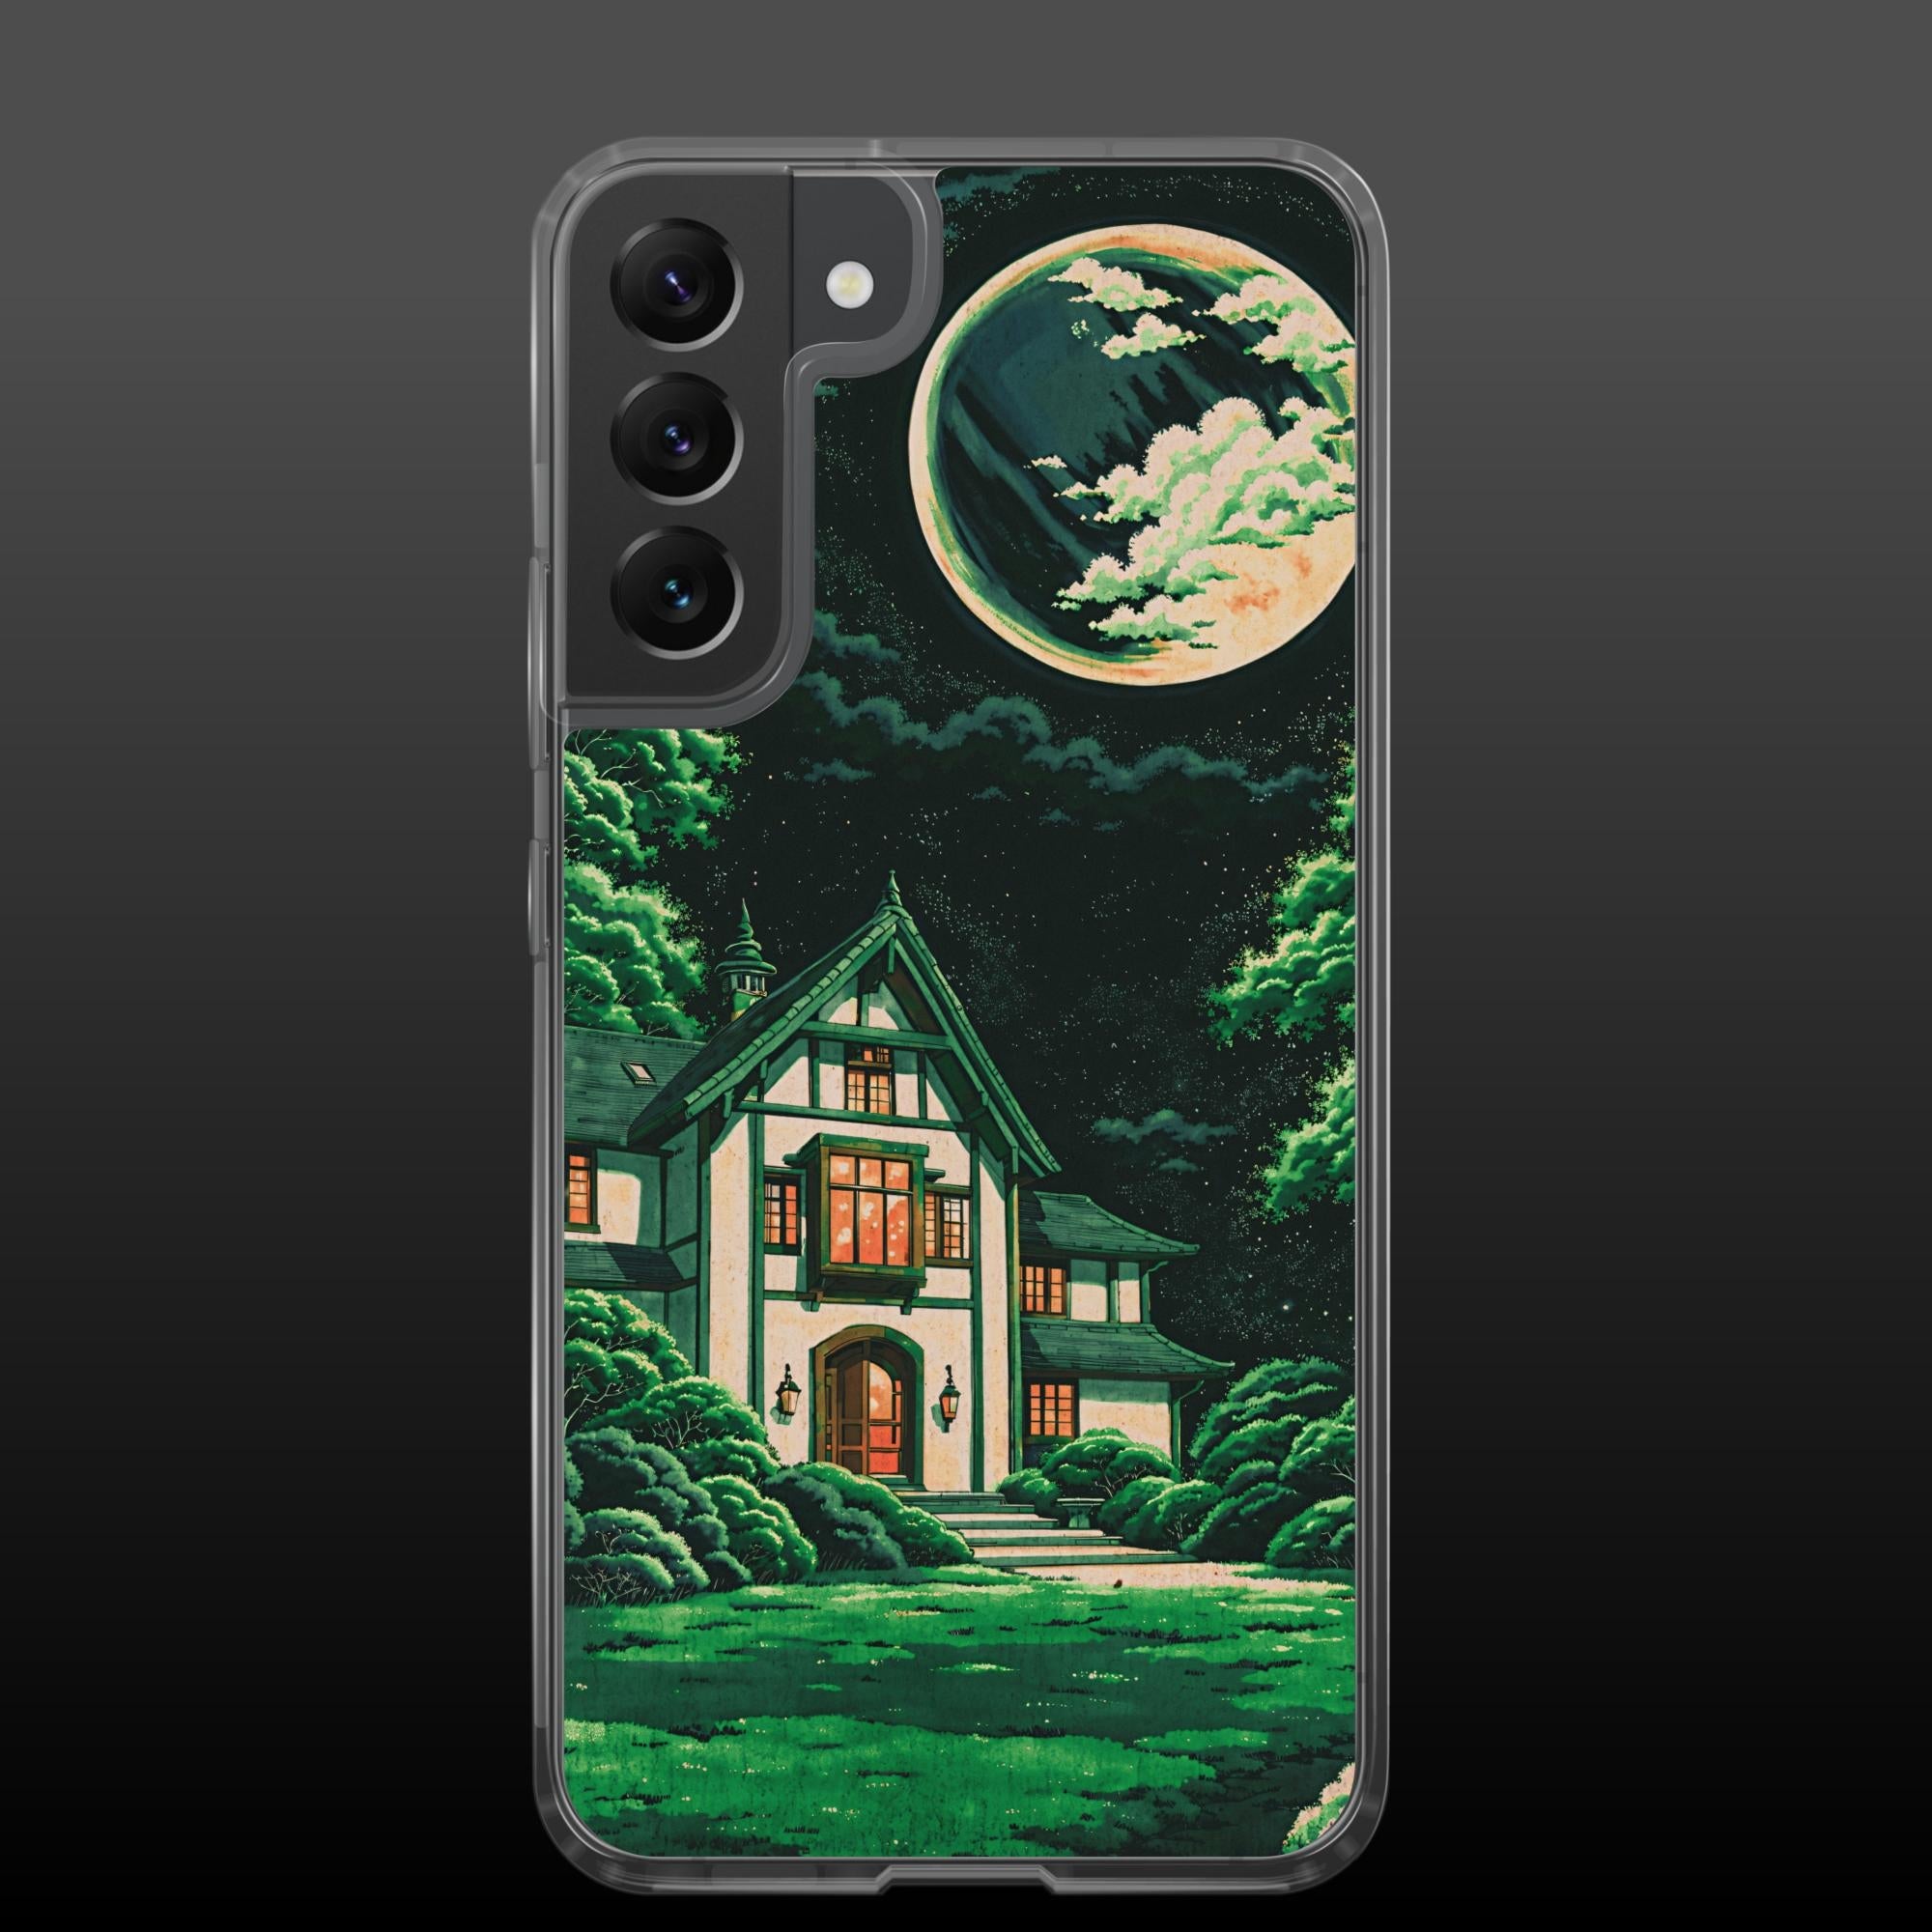 "Crescent night" clear samsung case - Clear samsung case - Ever colorful